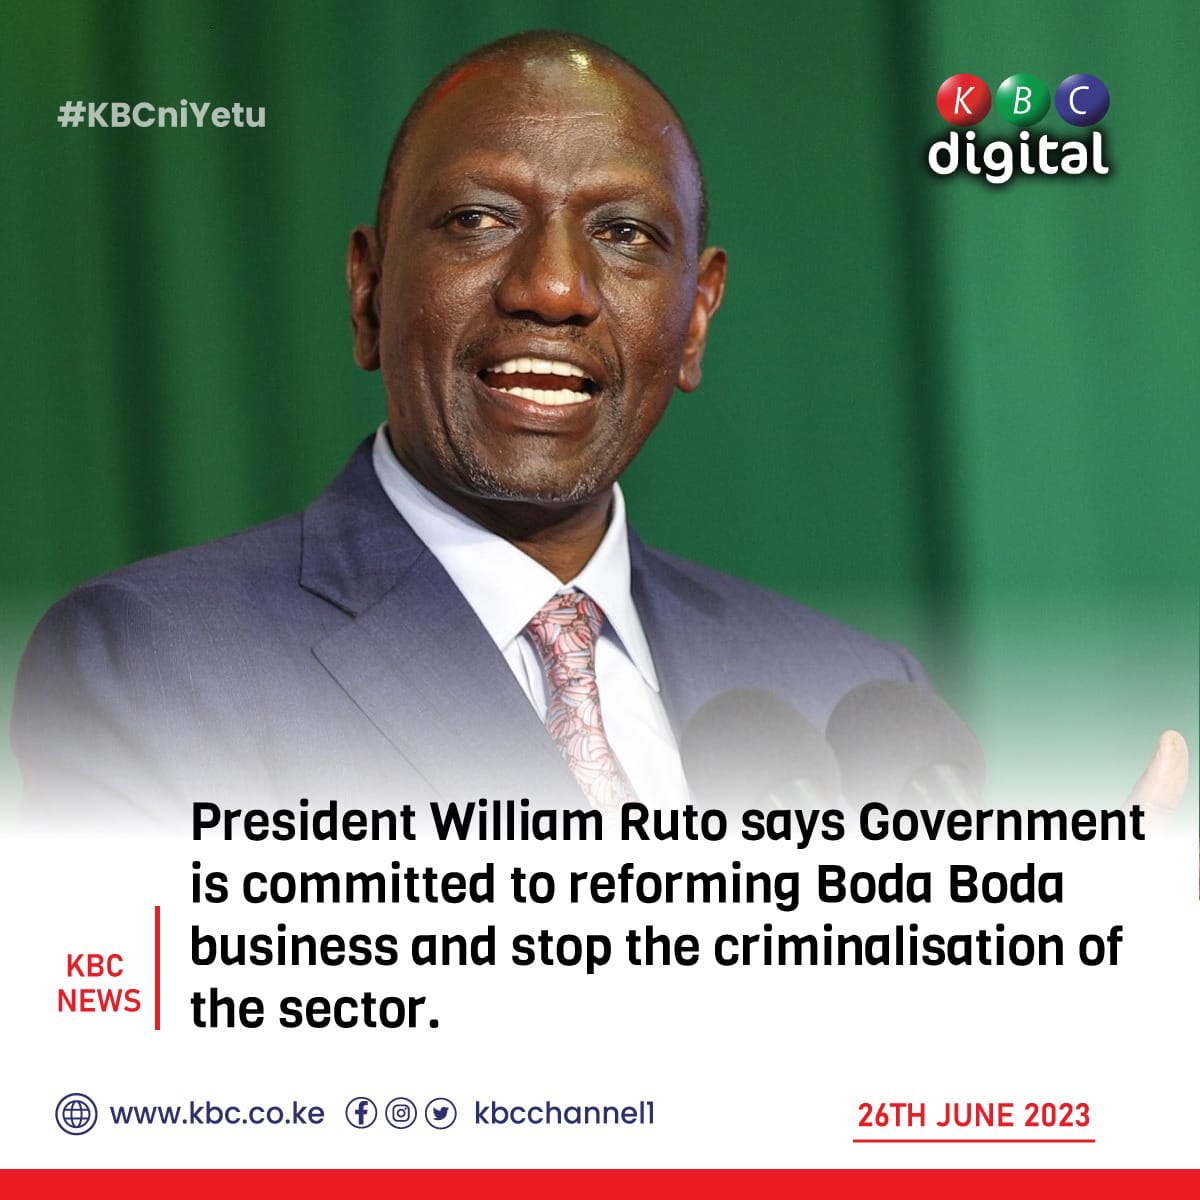 The President is committed to improving the Boda Boda sector.
#BodaBodaCare